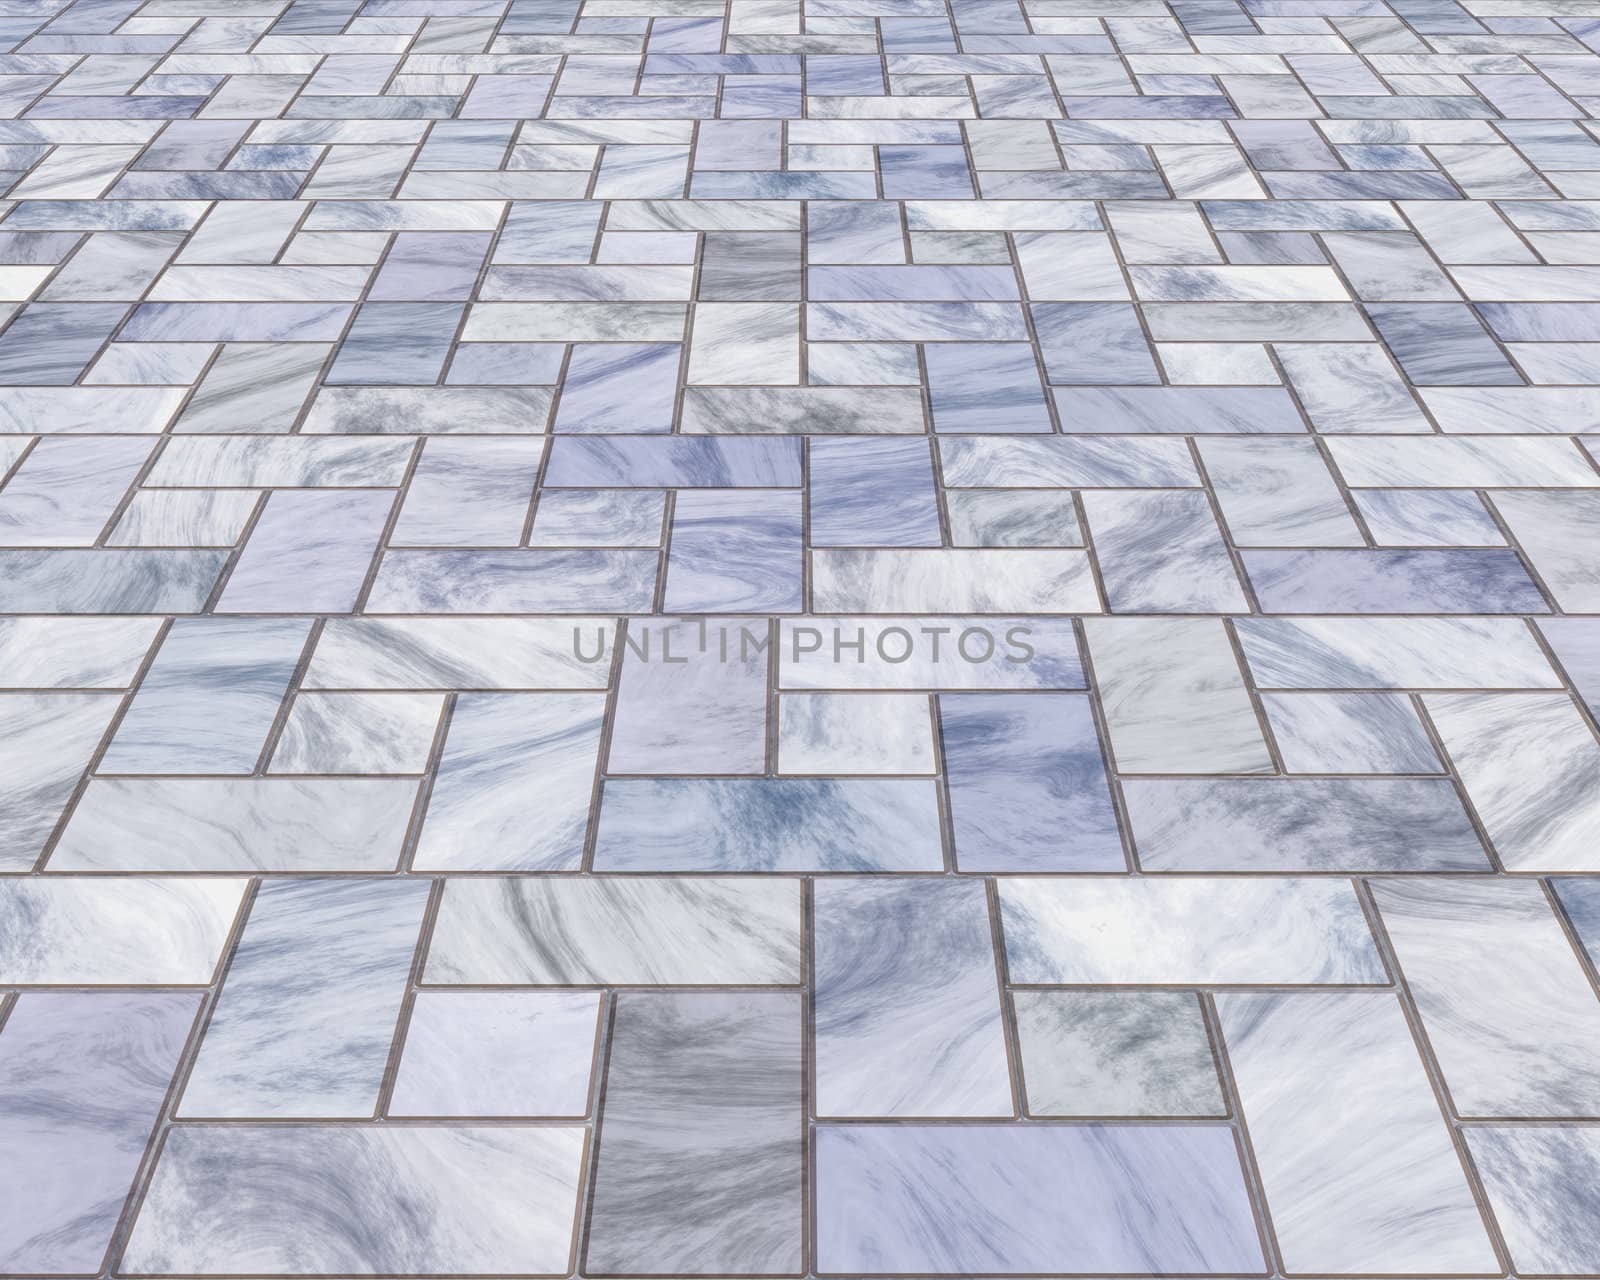 great image of marble pavers or tiles